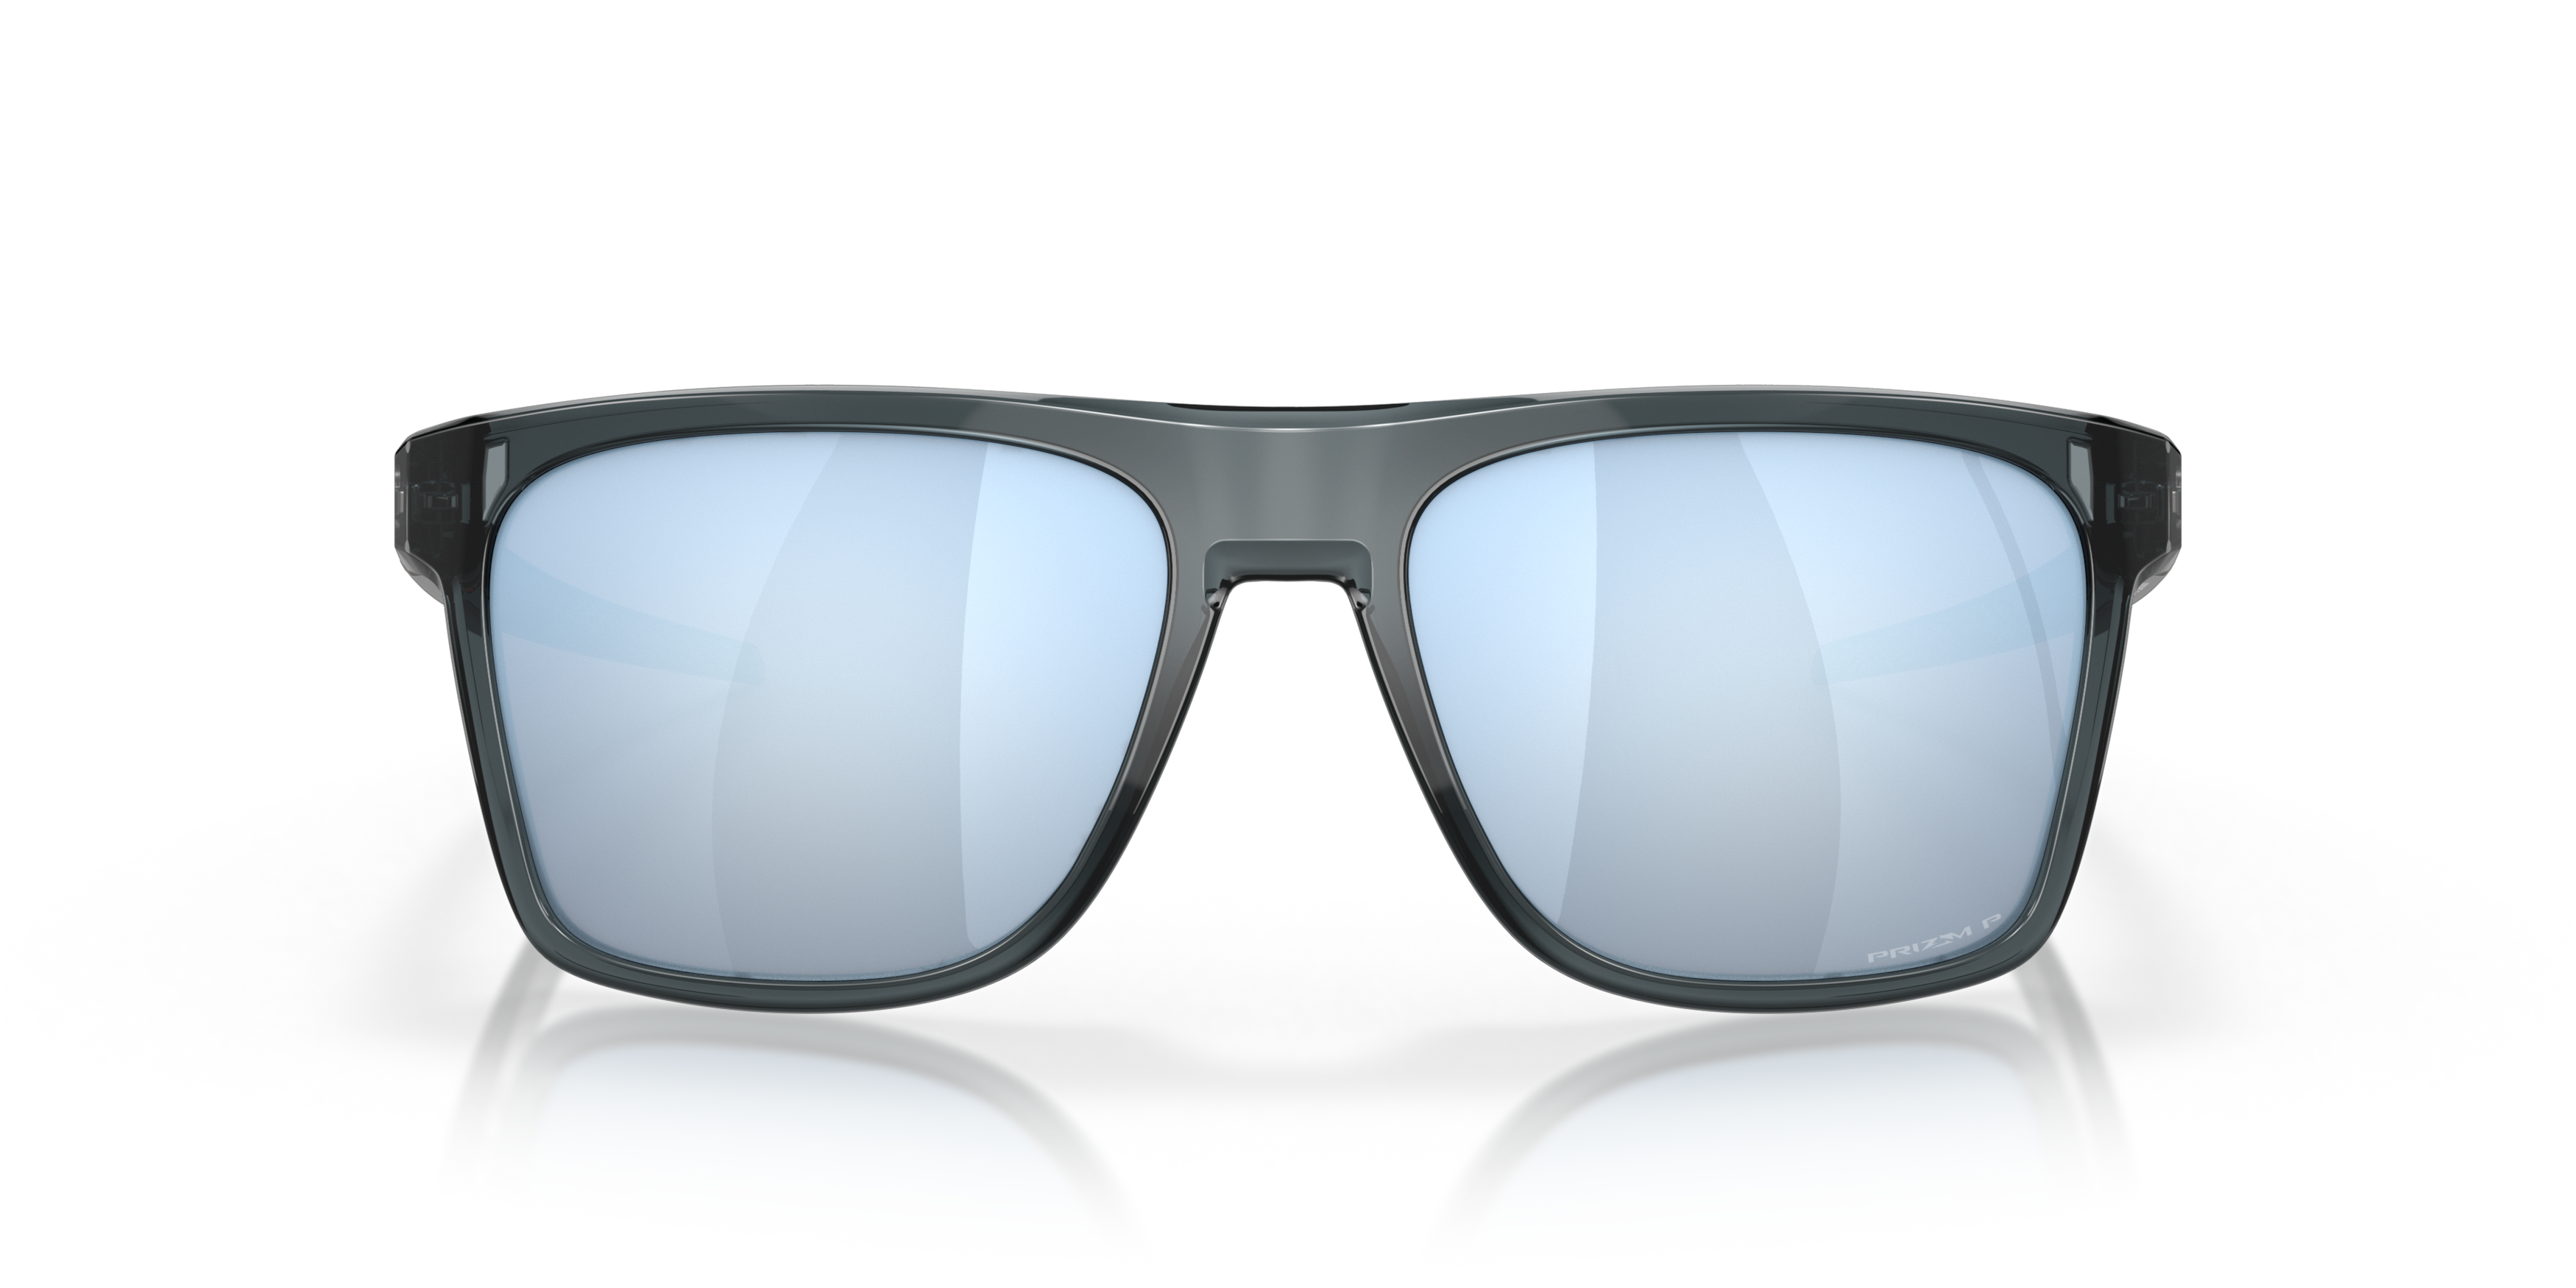 [products.image.front] Oakley 0OO9100 910005